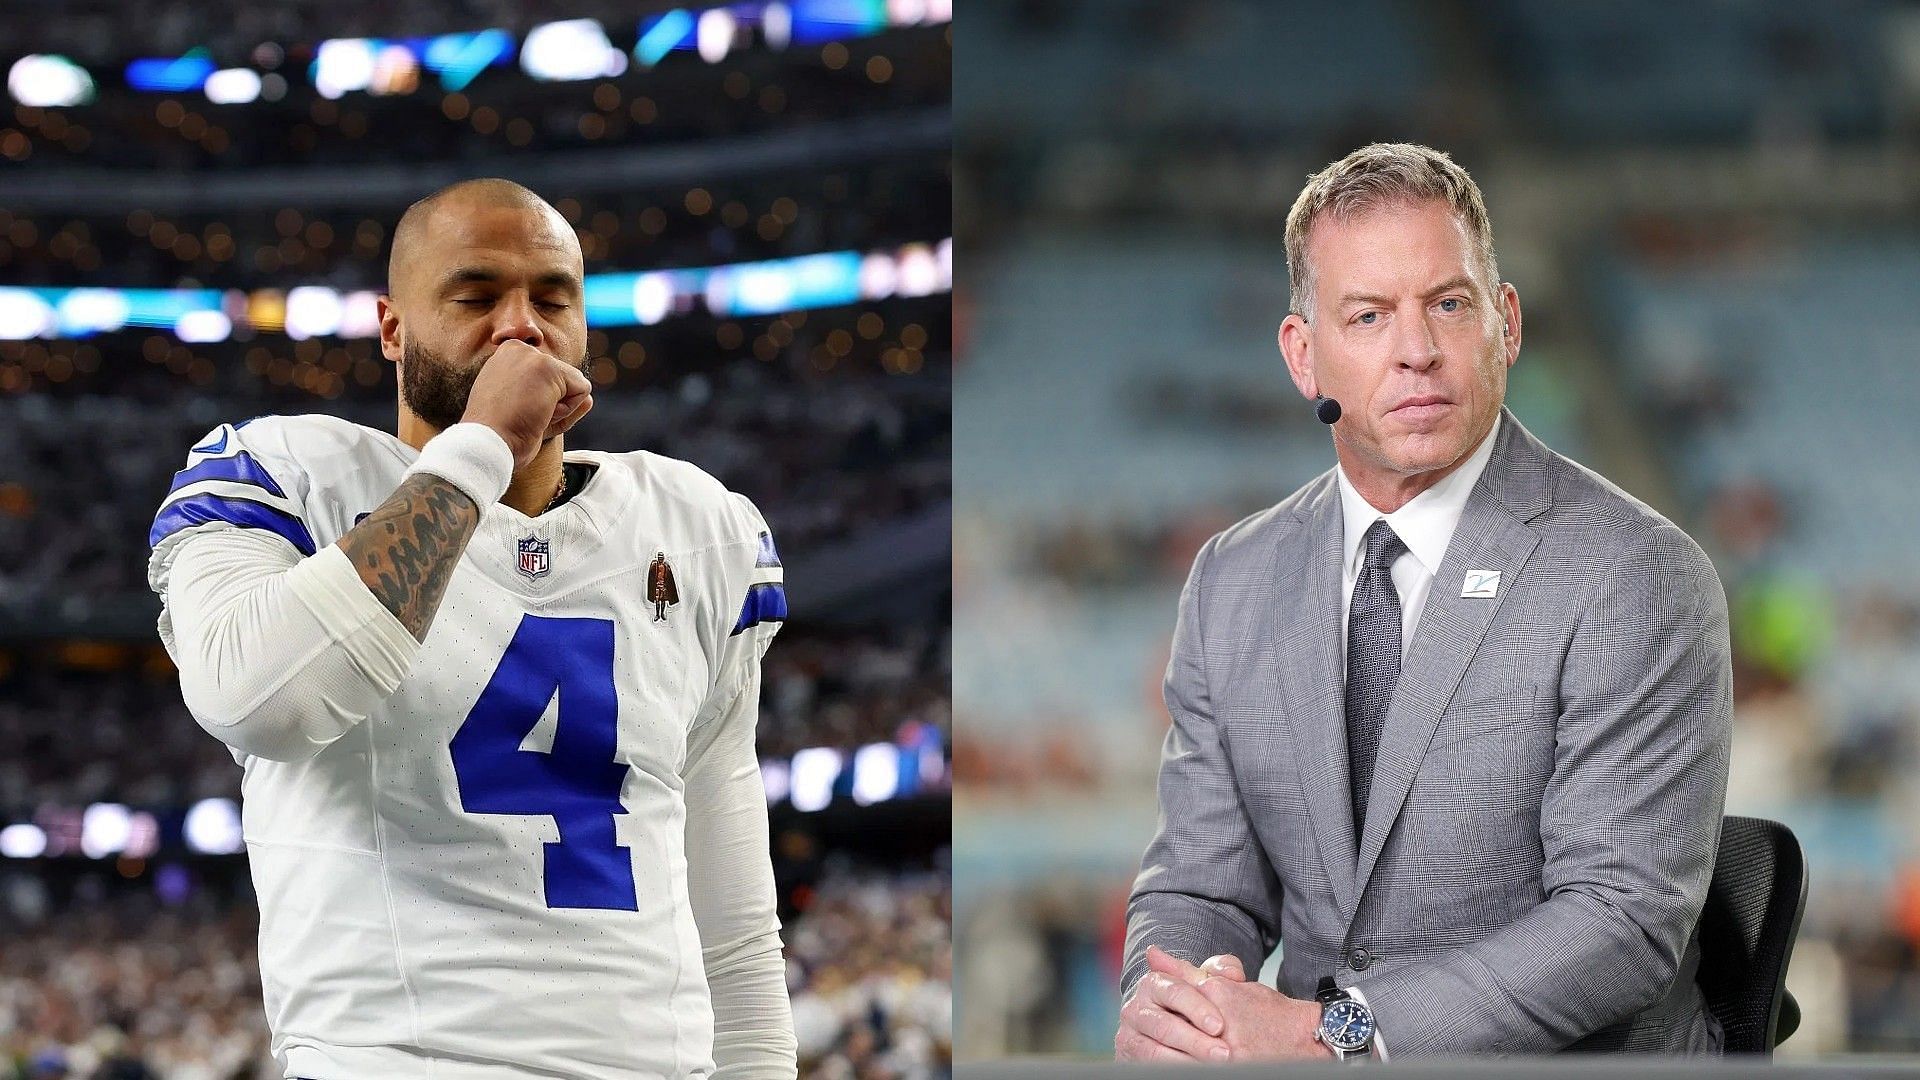 NFL analyst reminds Dak Prescott that leaving Dallas risks ruining chance to succeed Troy Aikman in broadcast booth